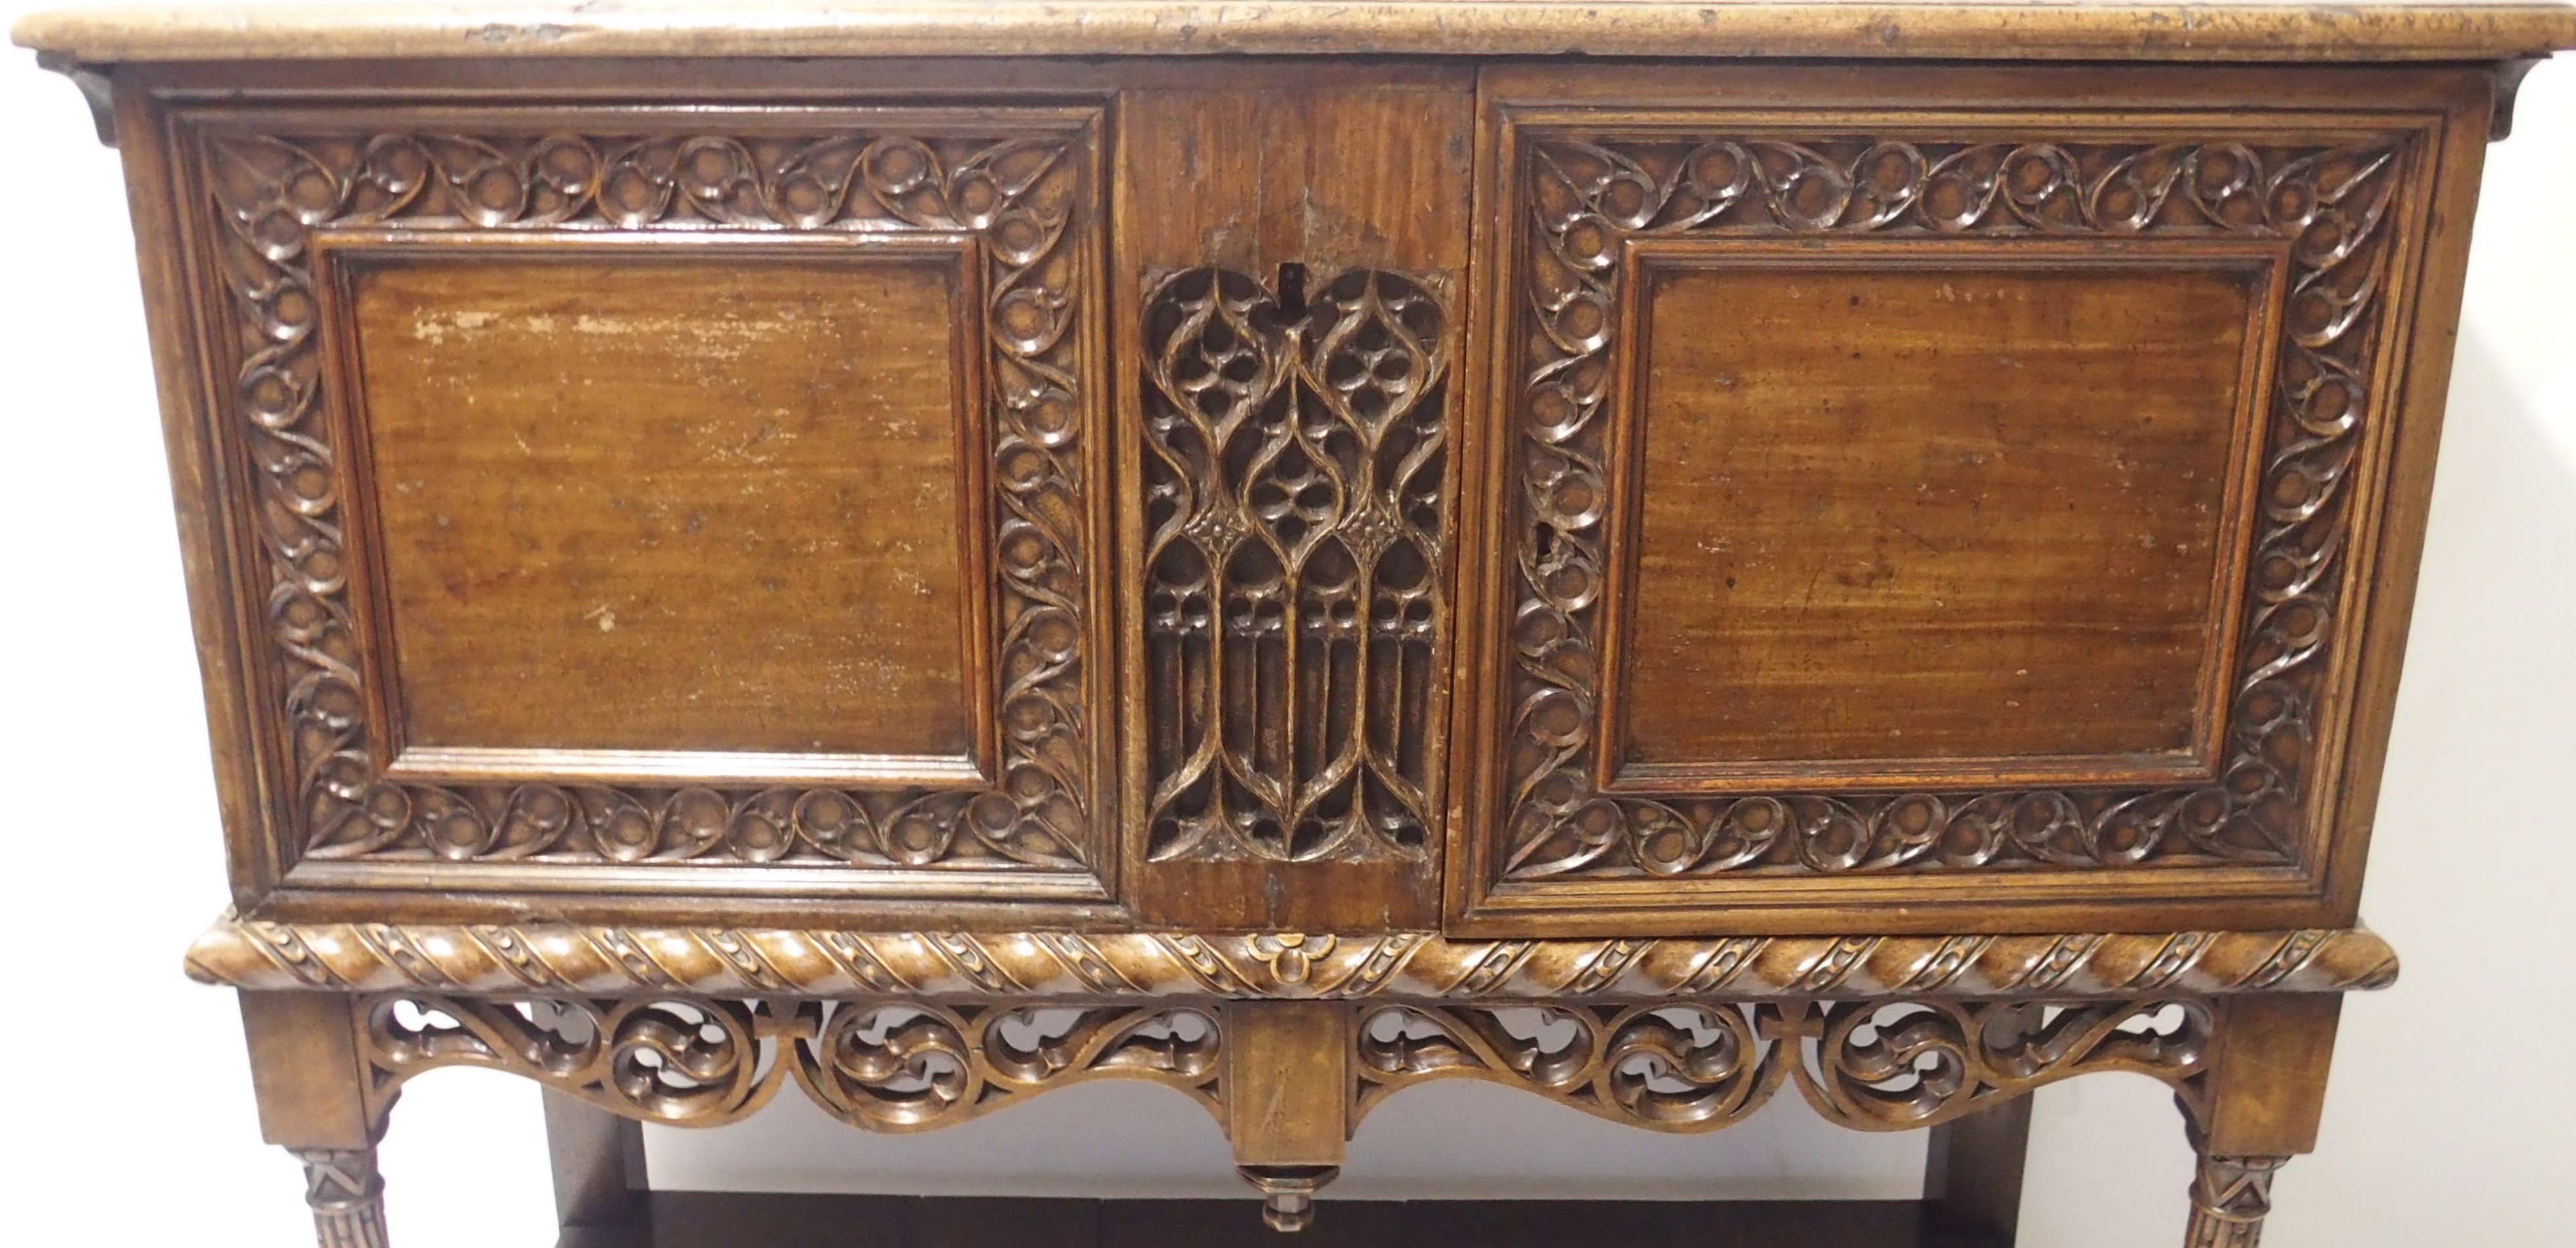 A FRENCH WALNUT LIVERY CUPBOARD the hinged top enclosing a deep and shallow recess, the front carved - Image 2 of 11